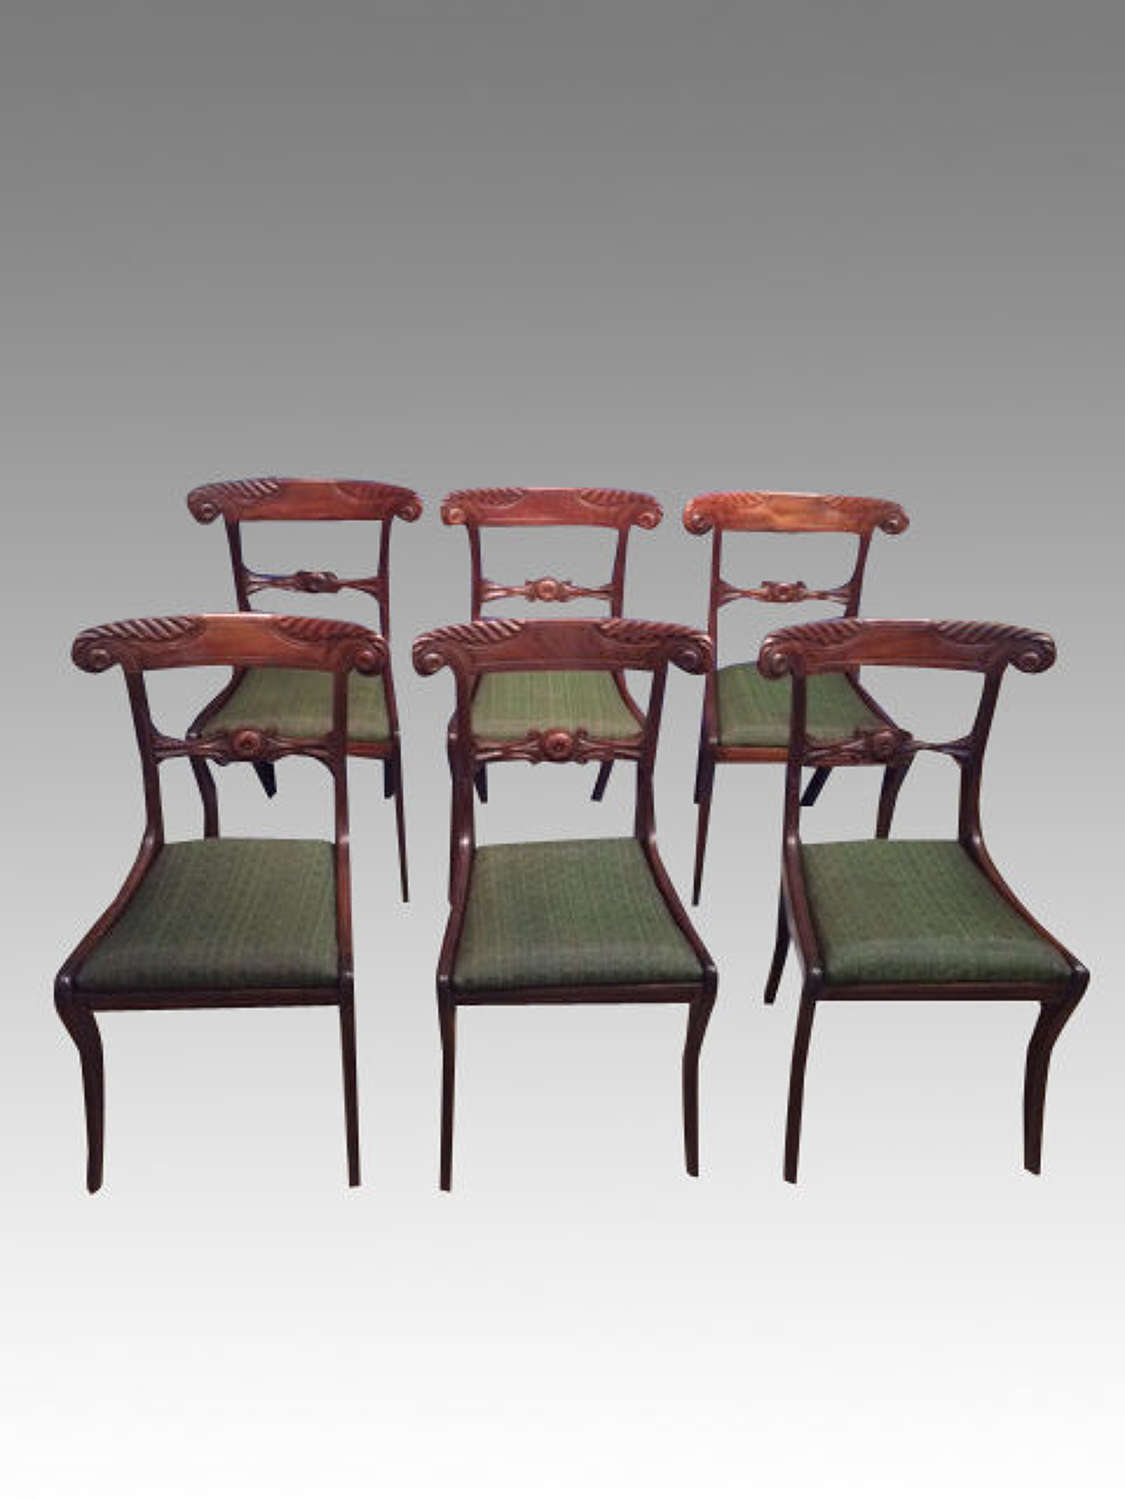 A set of 6 antique Regency mahogany dining chairs.